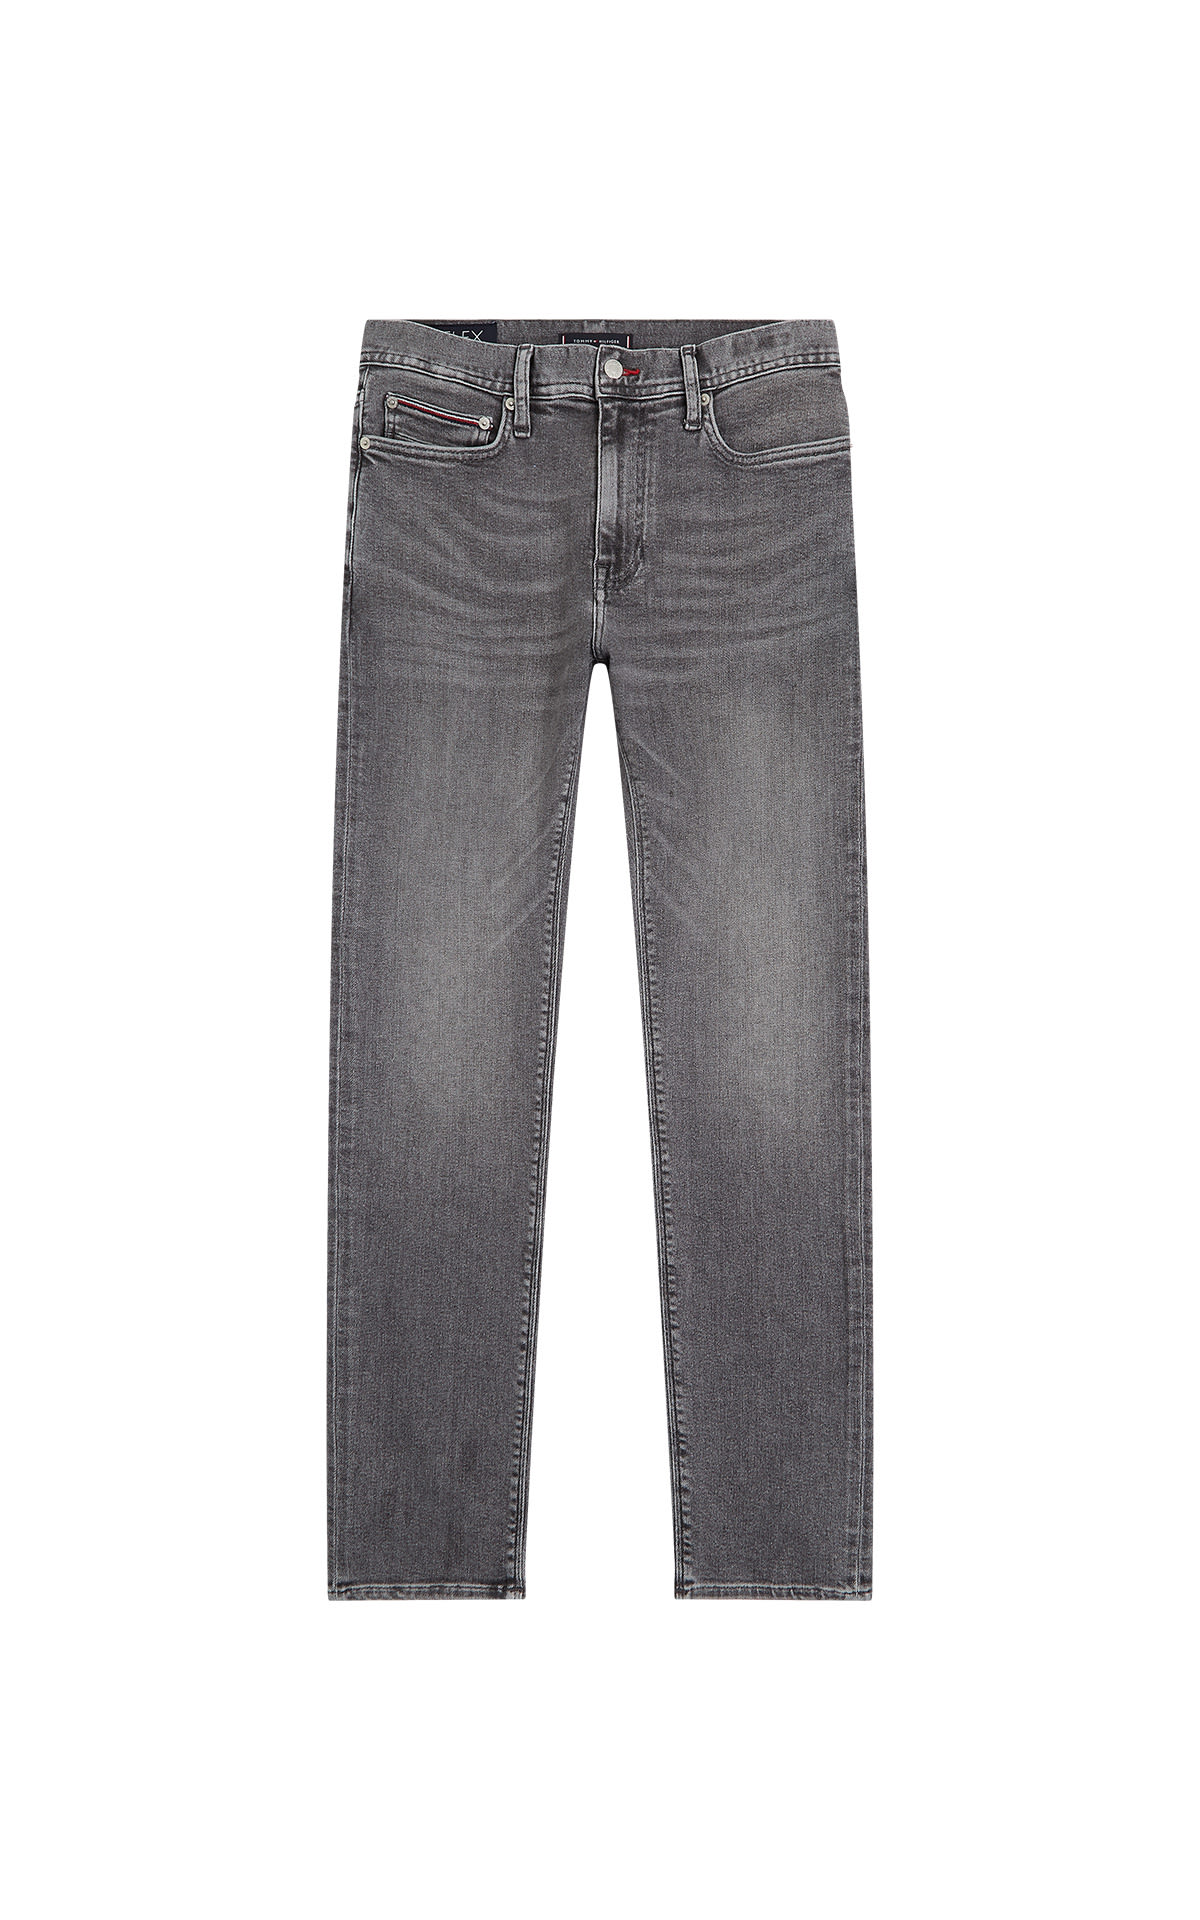 Tommy hilfiger denim high rise tapered jeans at The Bicester Village Shopping Collection